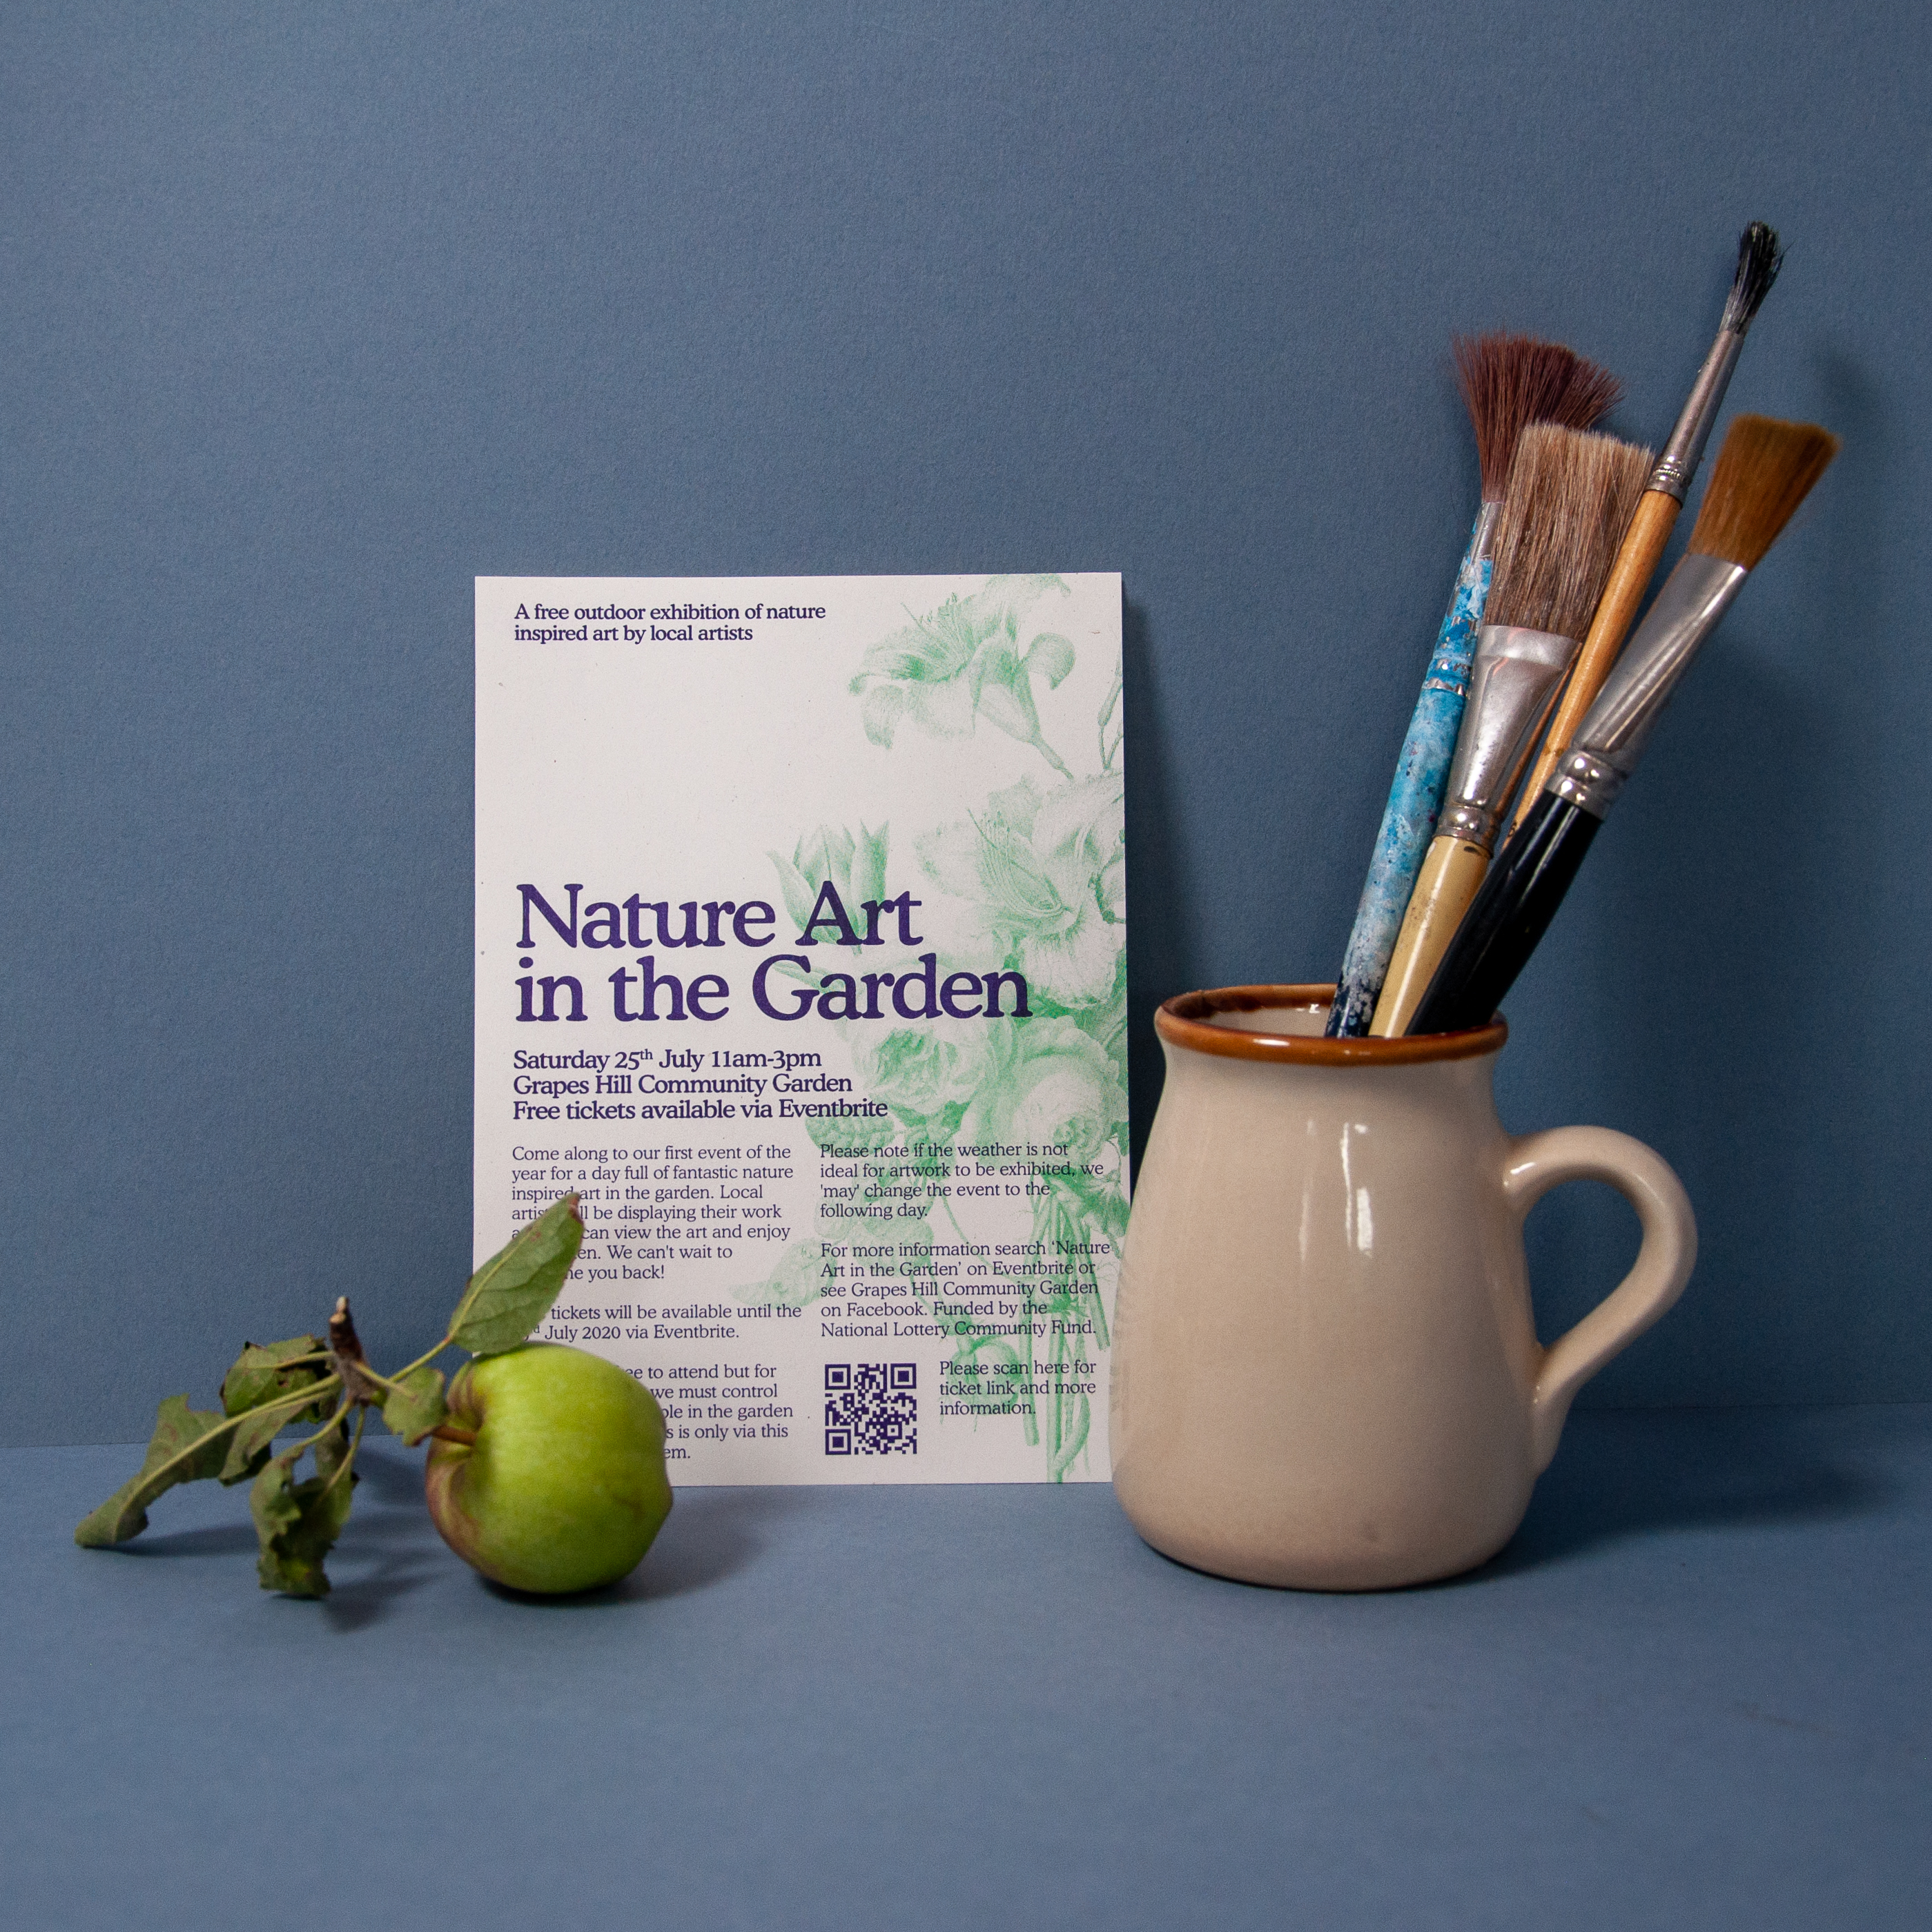 A photograph of a flyer for 'Nature in the Garden', surrounded by an apple and a mug full of paintbrushes.